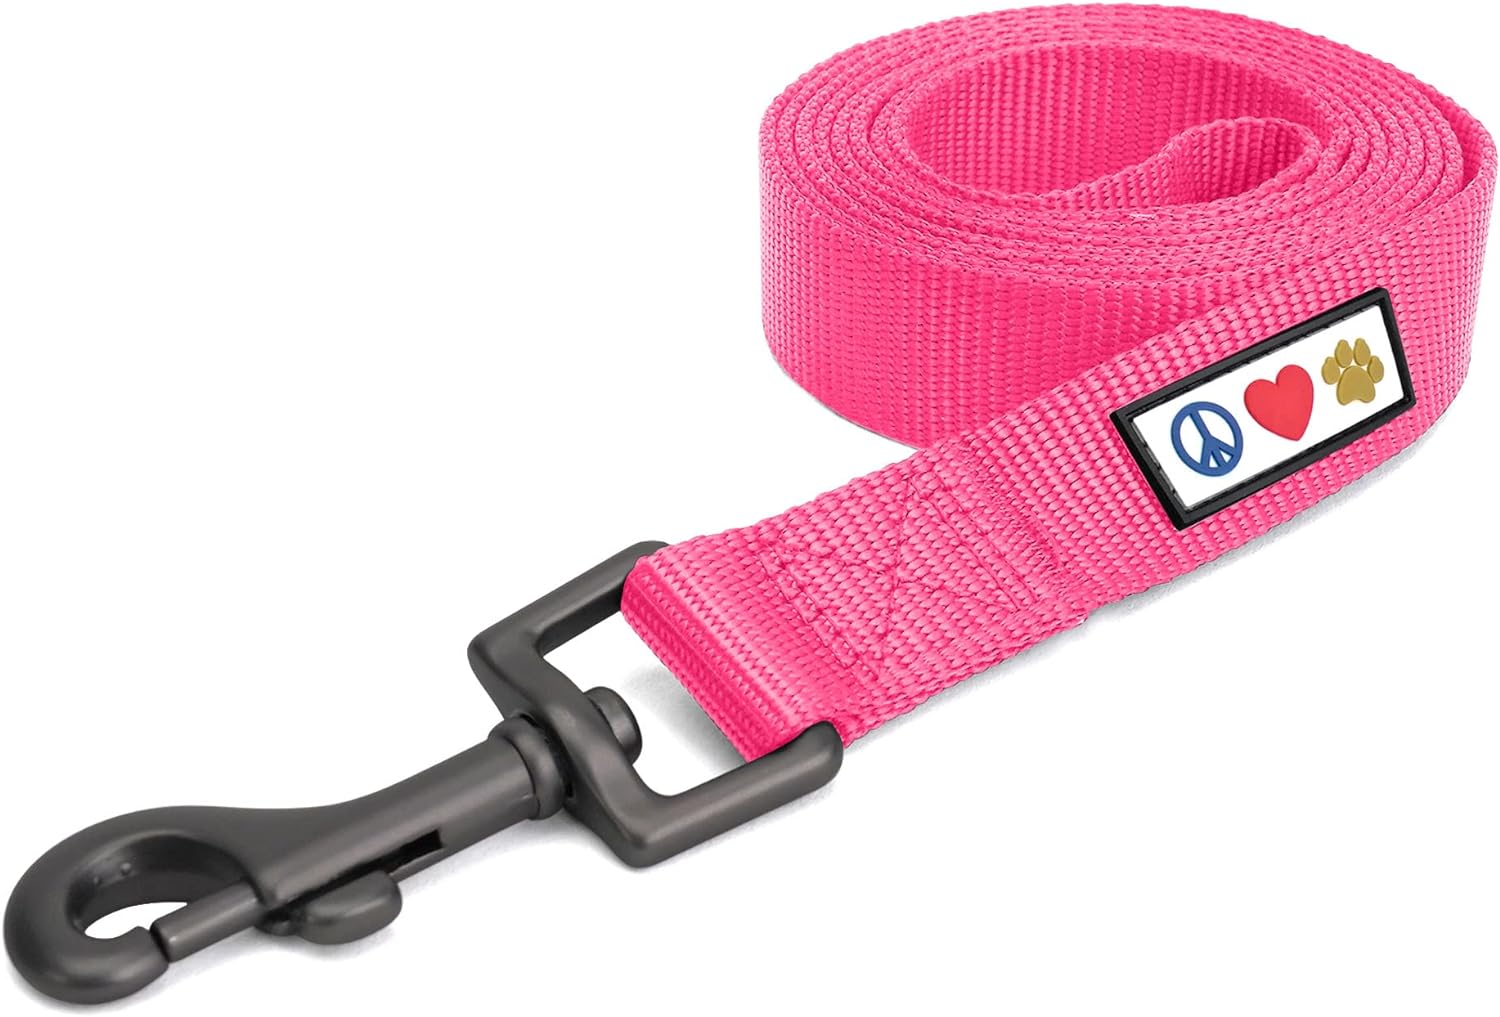 Pawtitas Dog Lead for Small Dogs Comfortable Handle Training Dog Lead 1.8m Long Dog Lead Puppy Lead - Solid Pink Dog Lead for Small Breeds